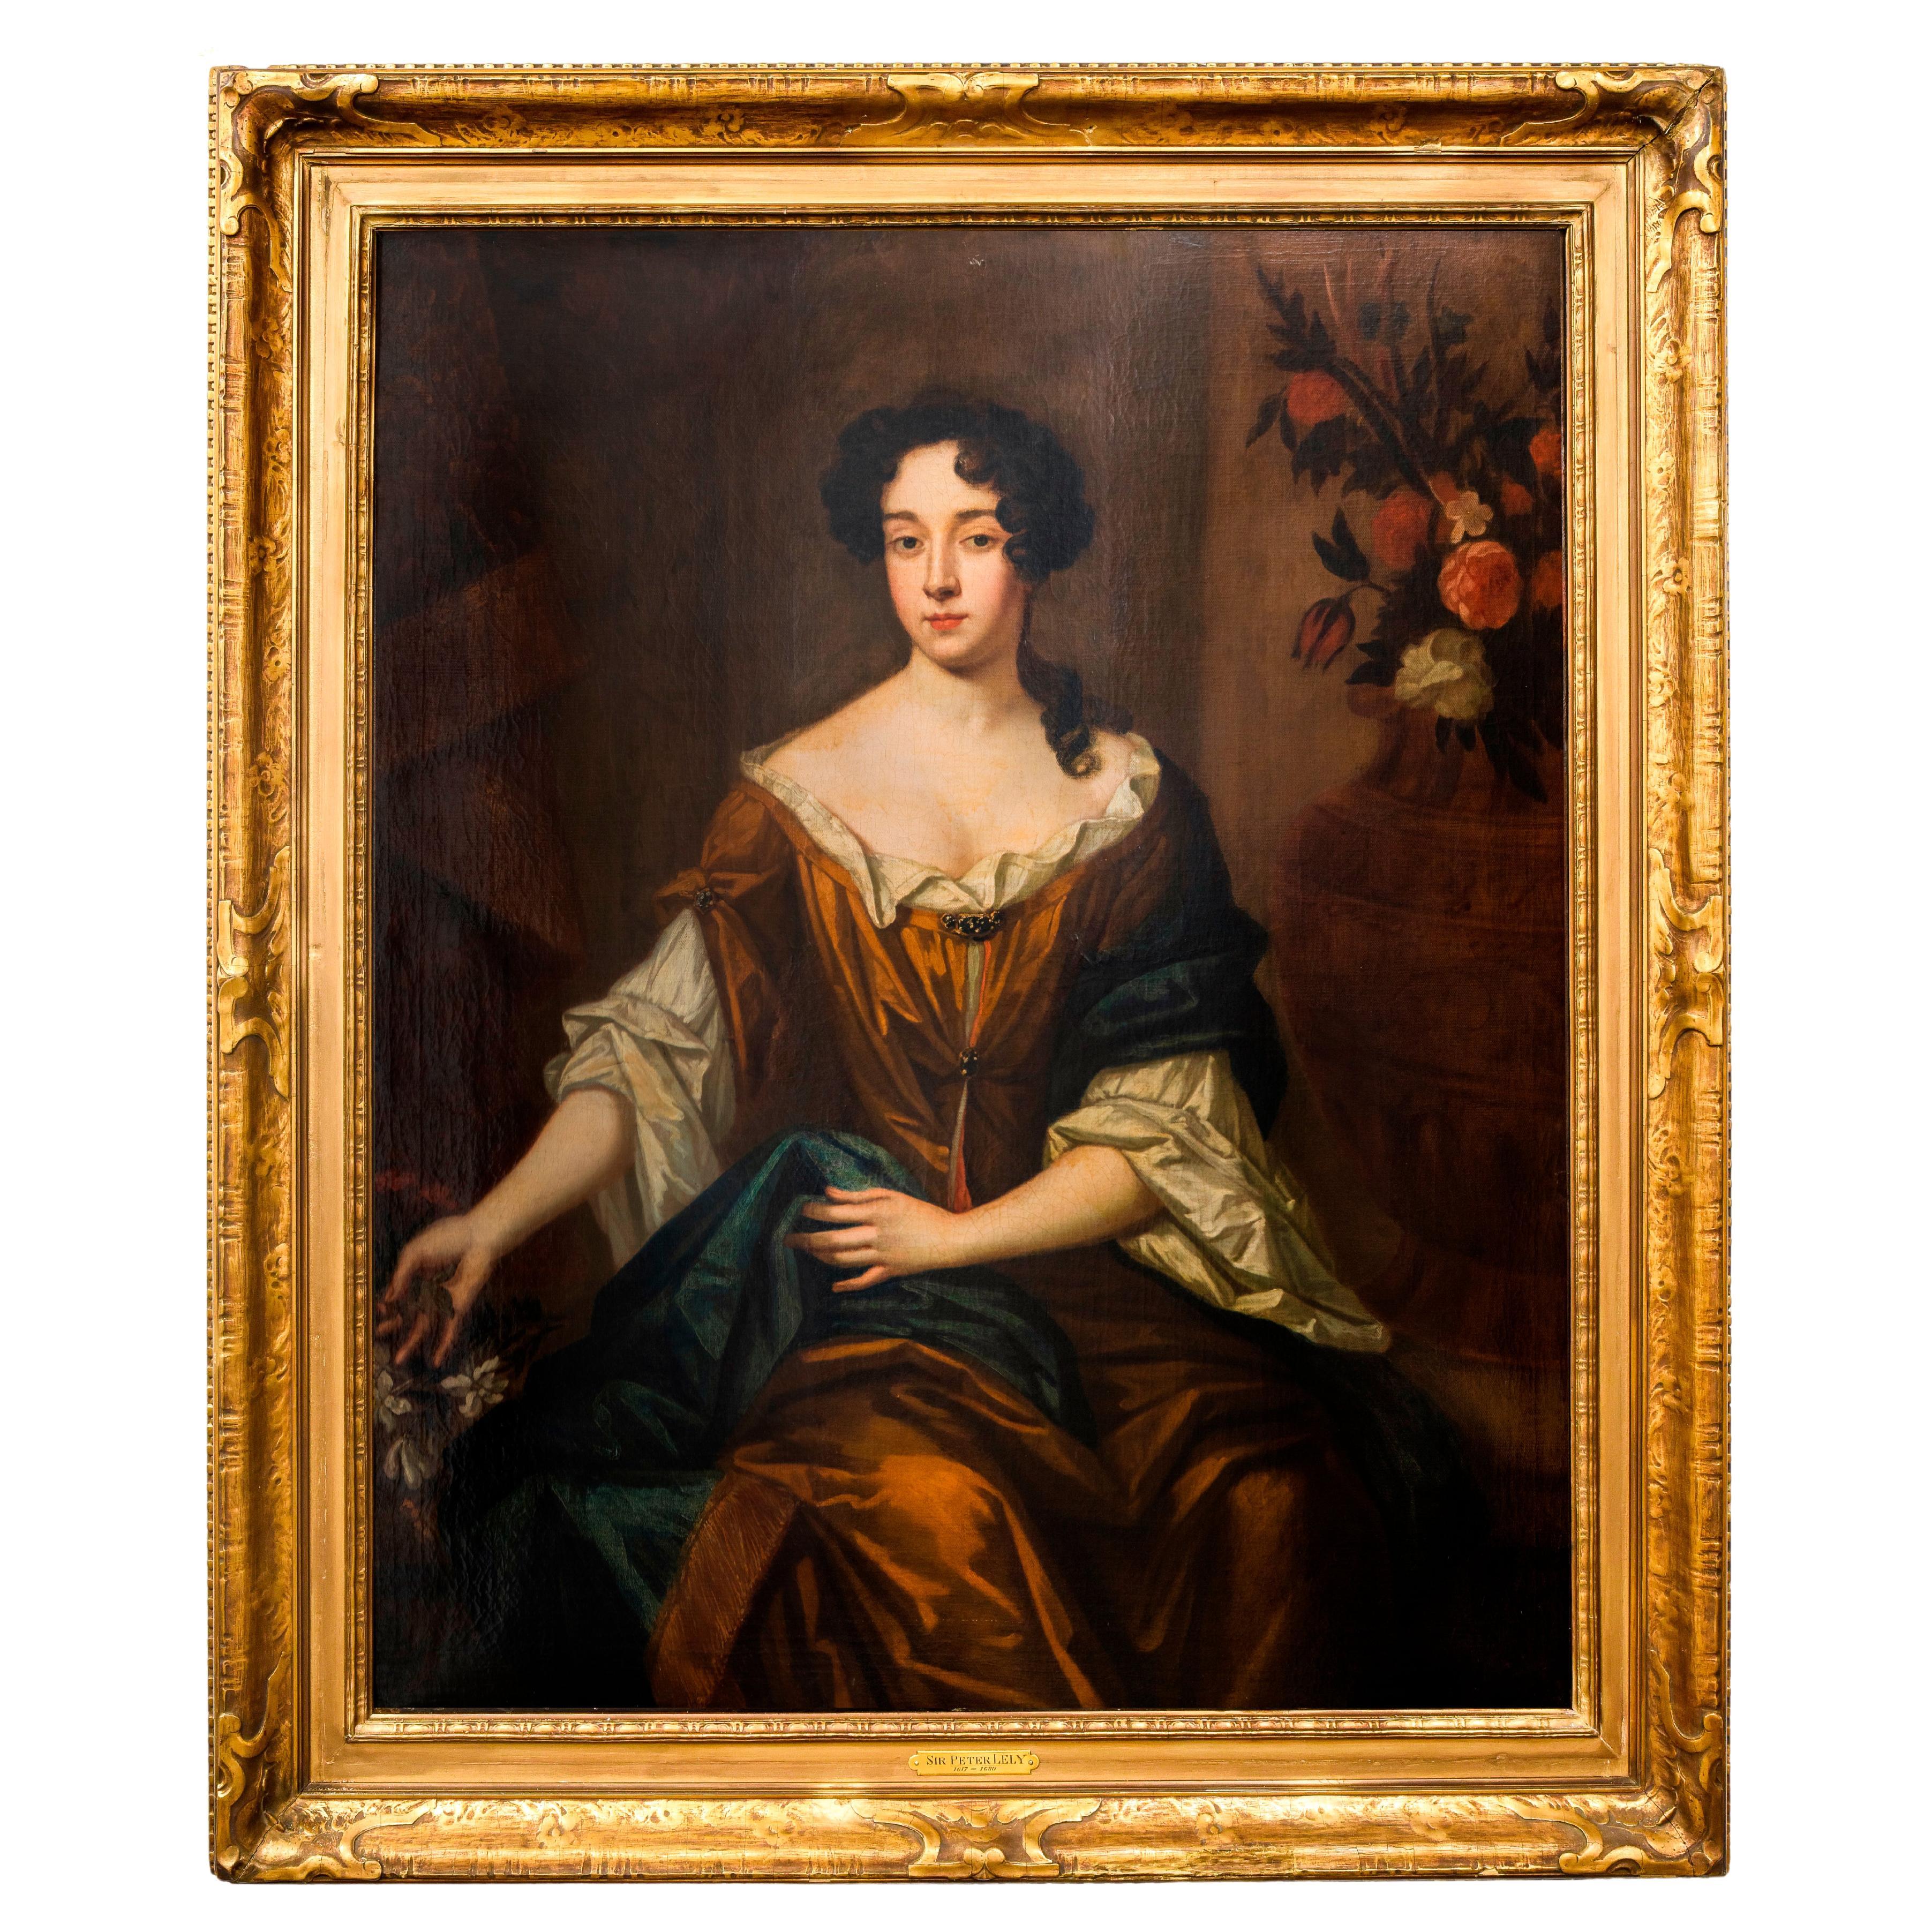 Sir Peter Lely Attributed Portrait of a Noblewoman